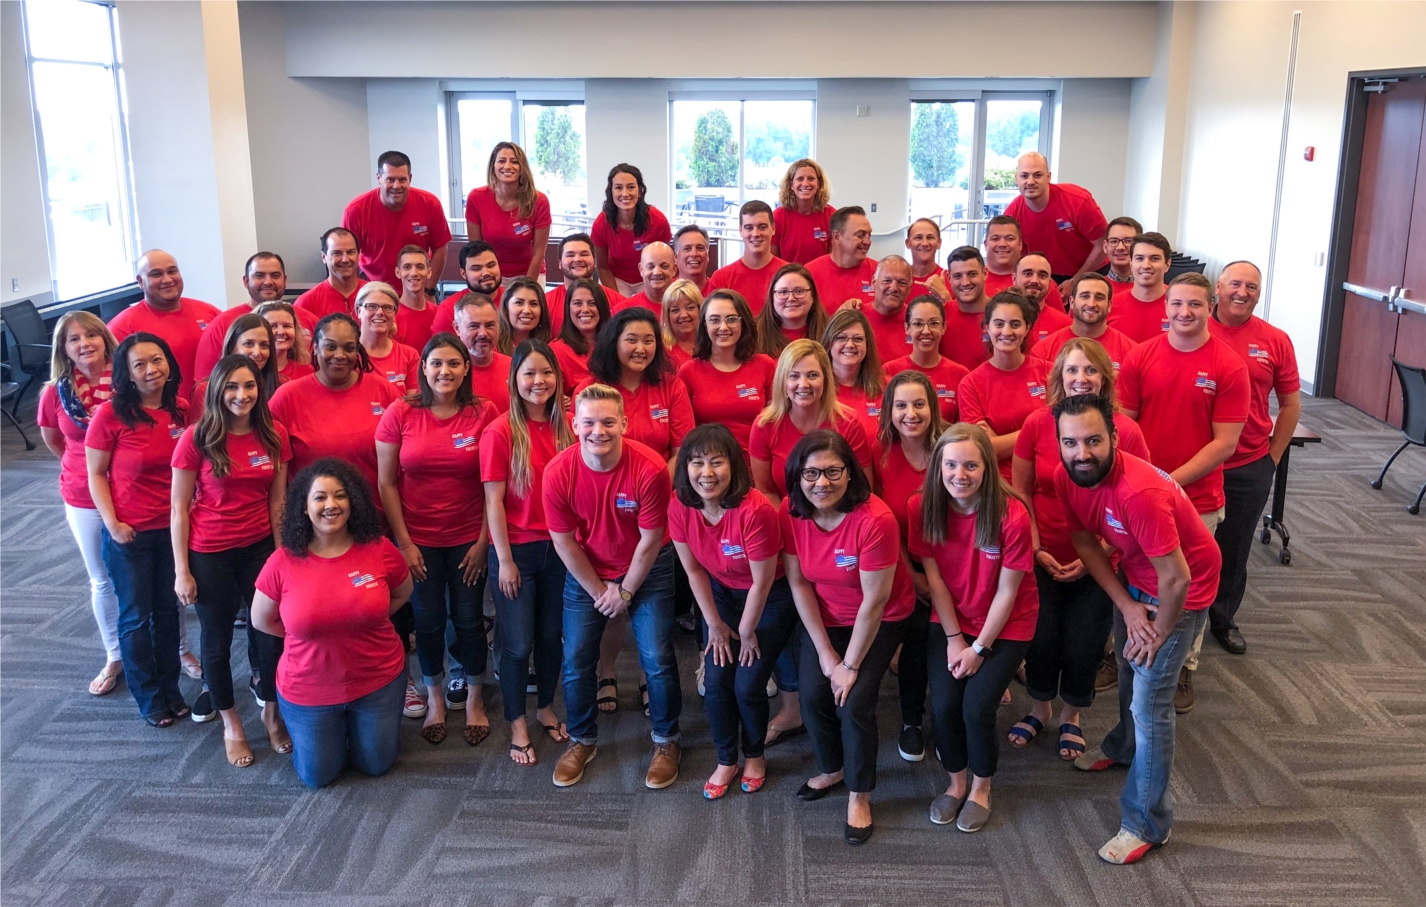 Fourth of July 2019 at FHM Corporate HQ in Fairfax, VA